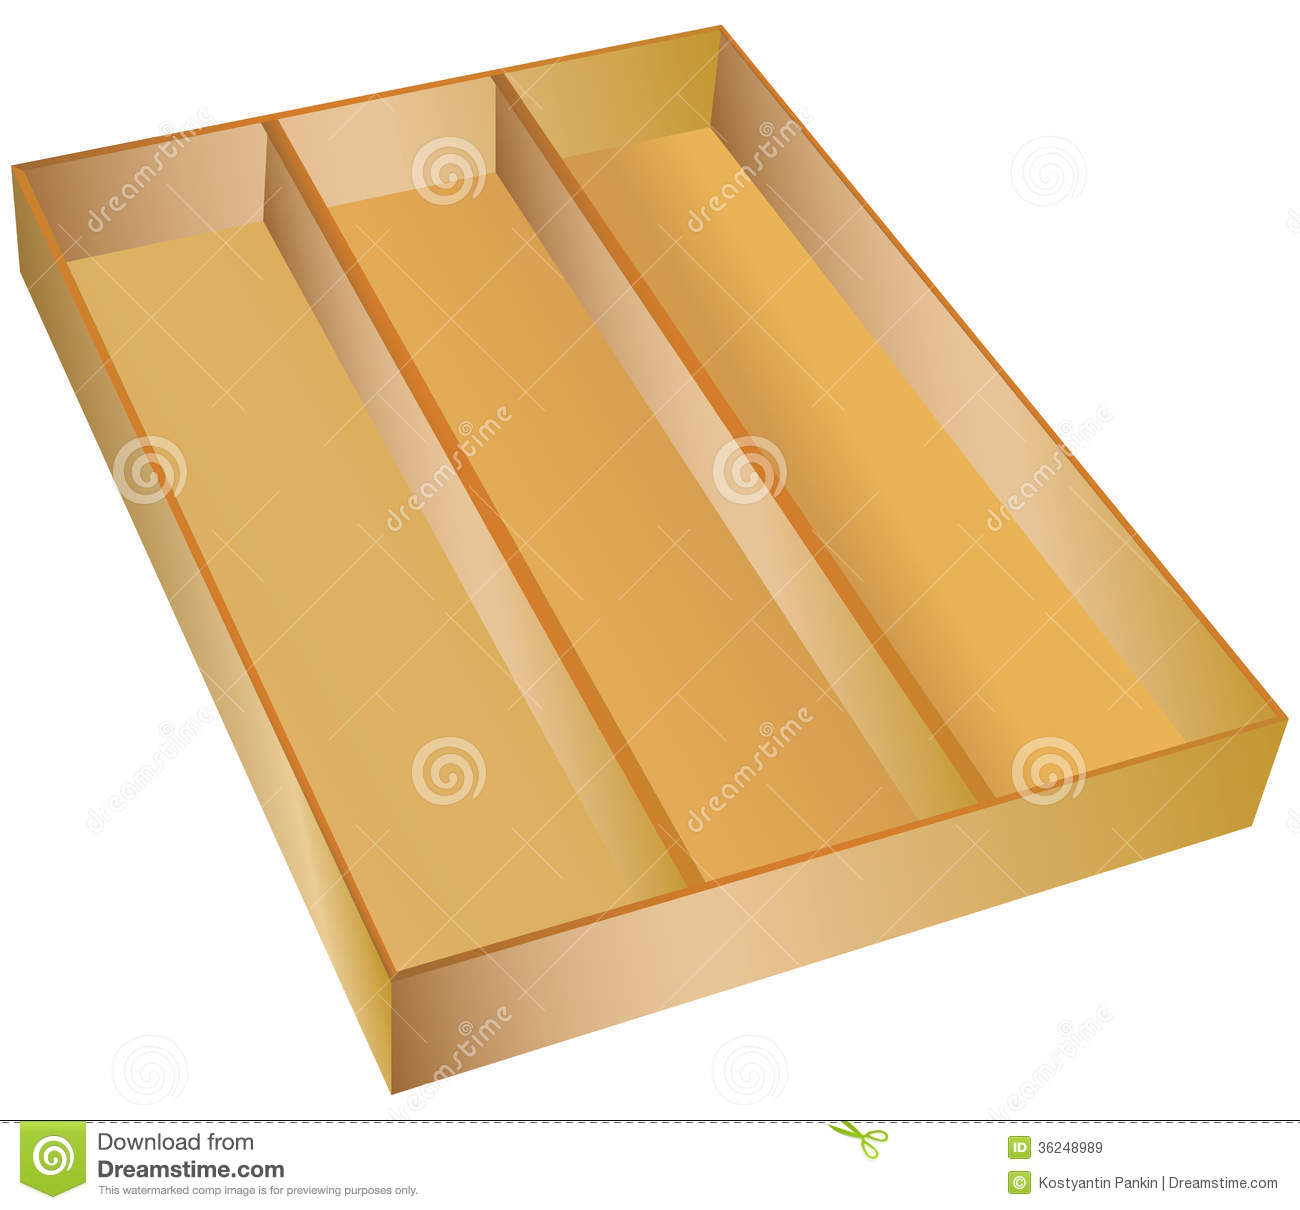 Part Drawer Wooden Organizer Royalty Free Stock Images   Image    